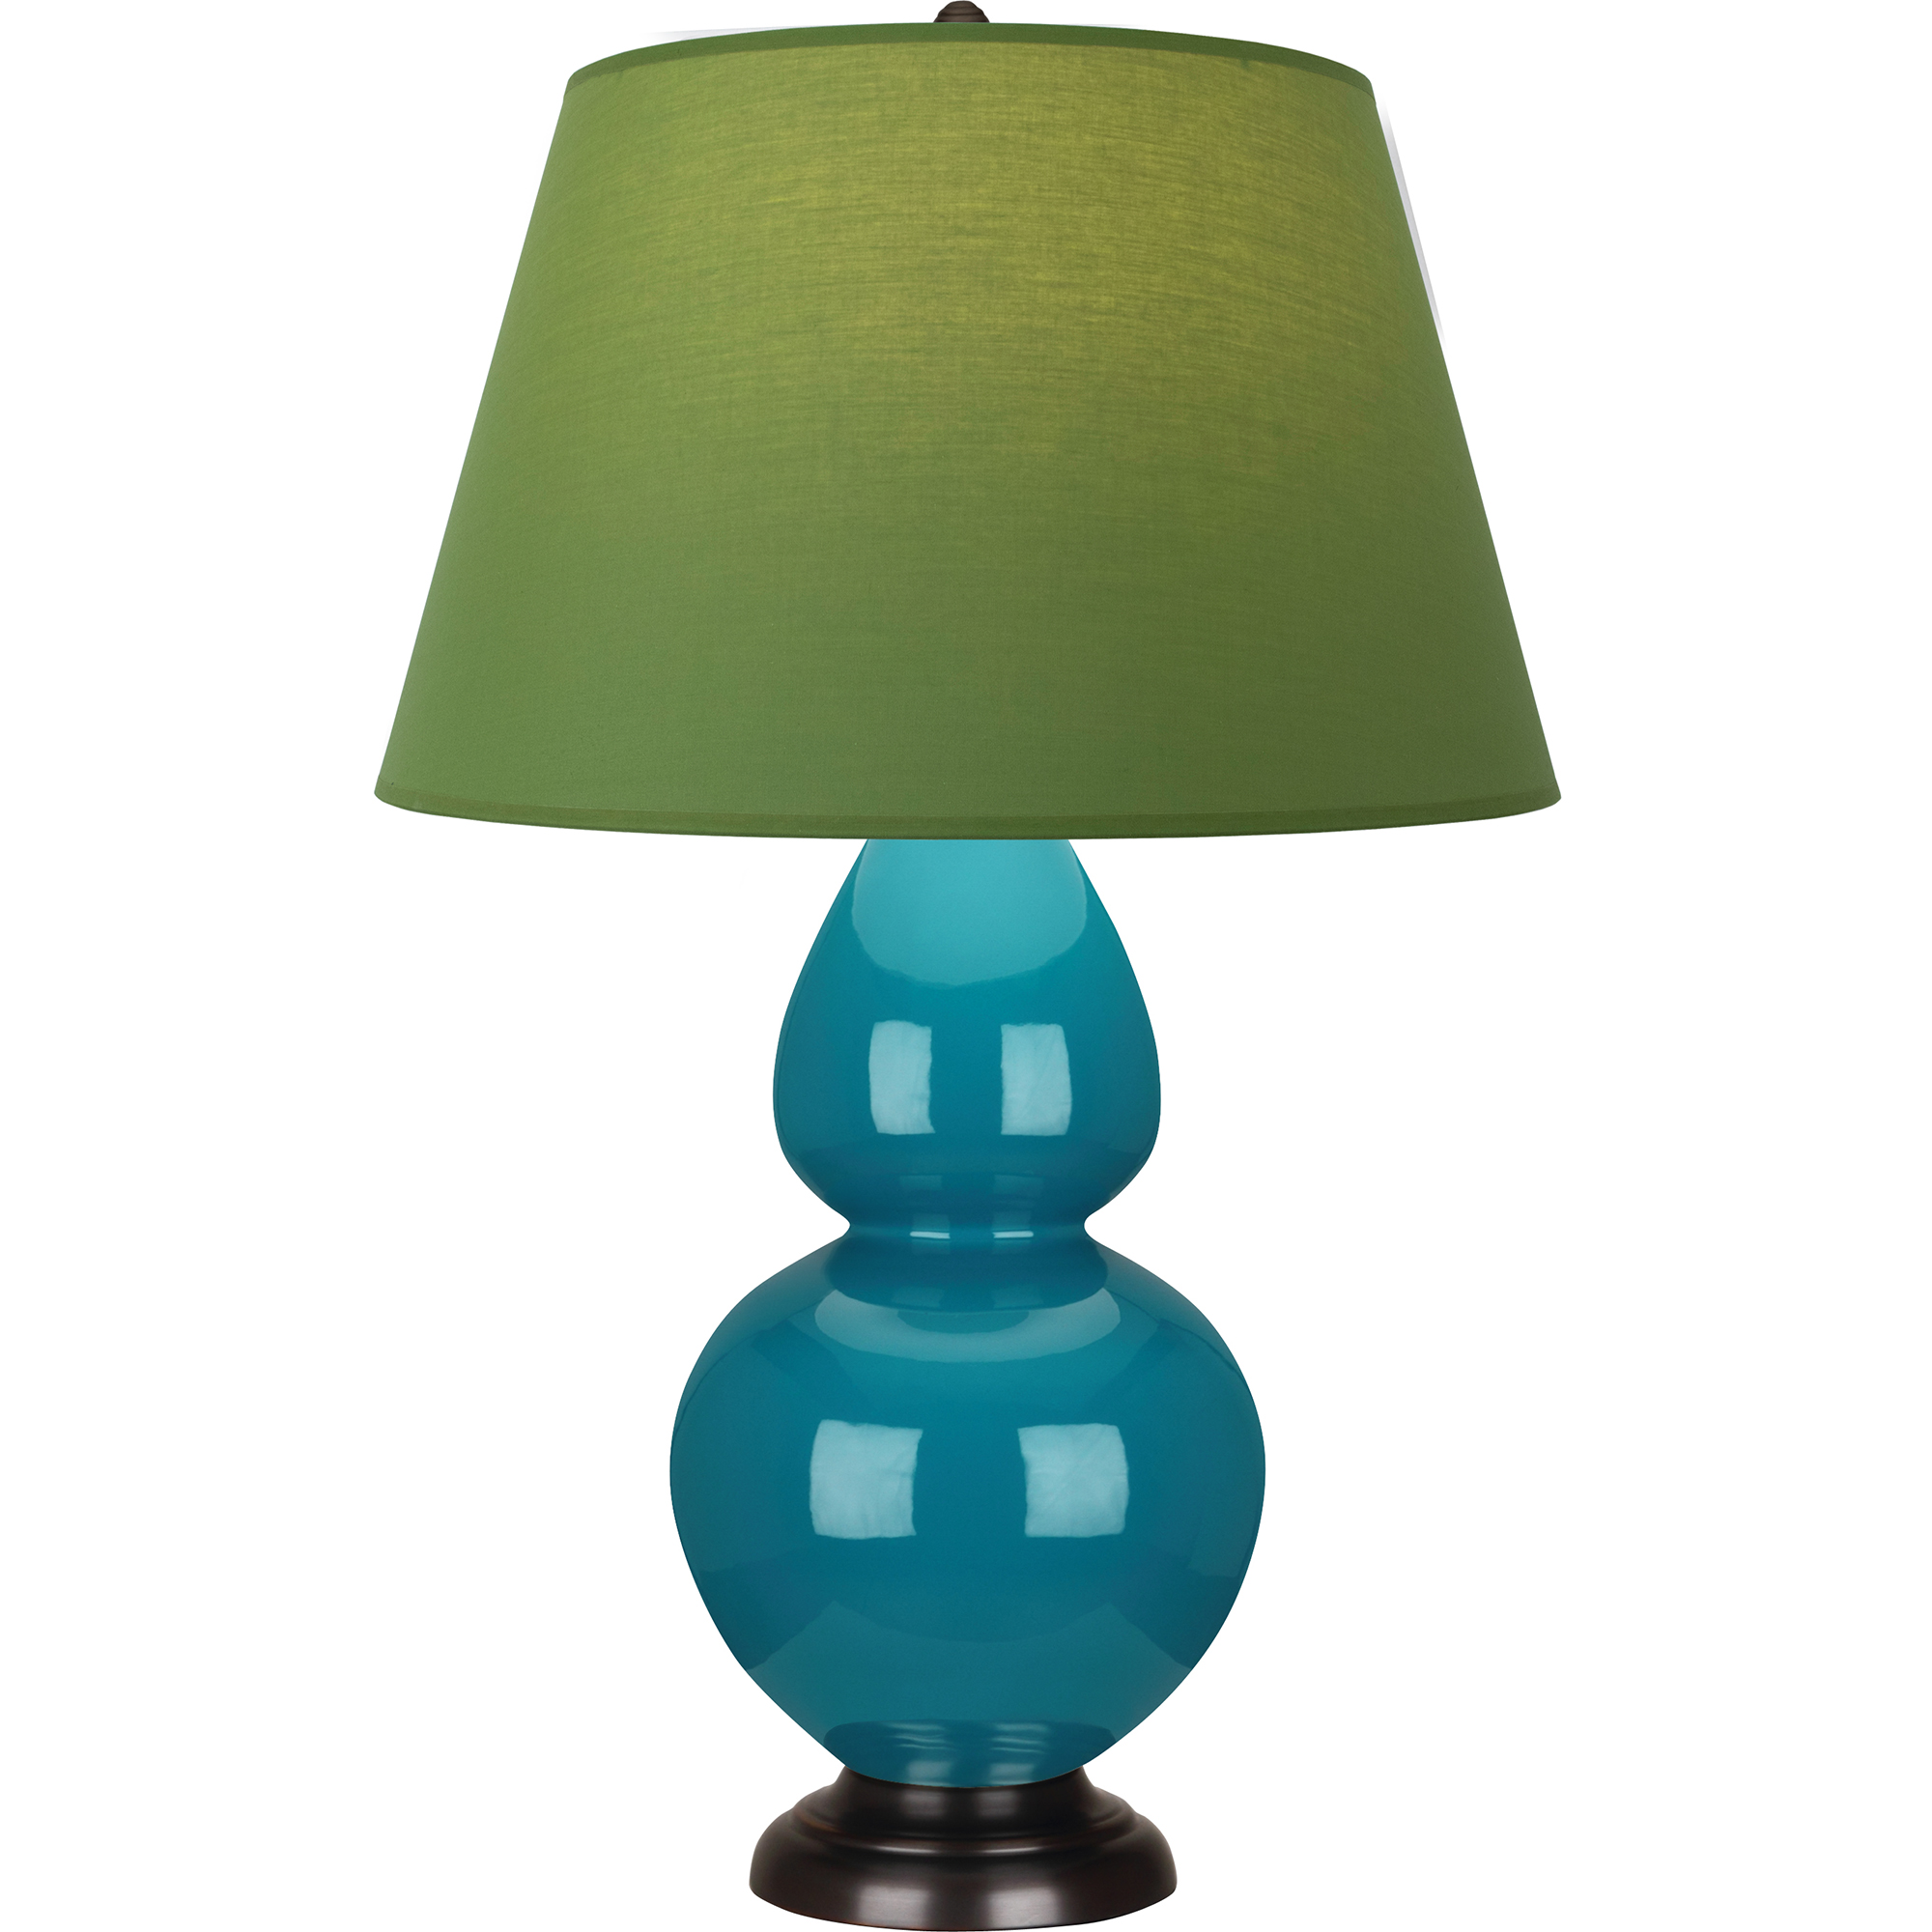 Double Gourd Table Lamp Style #1752G